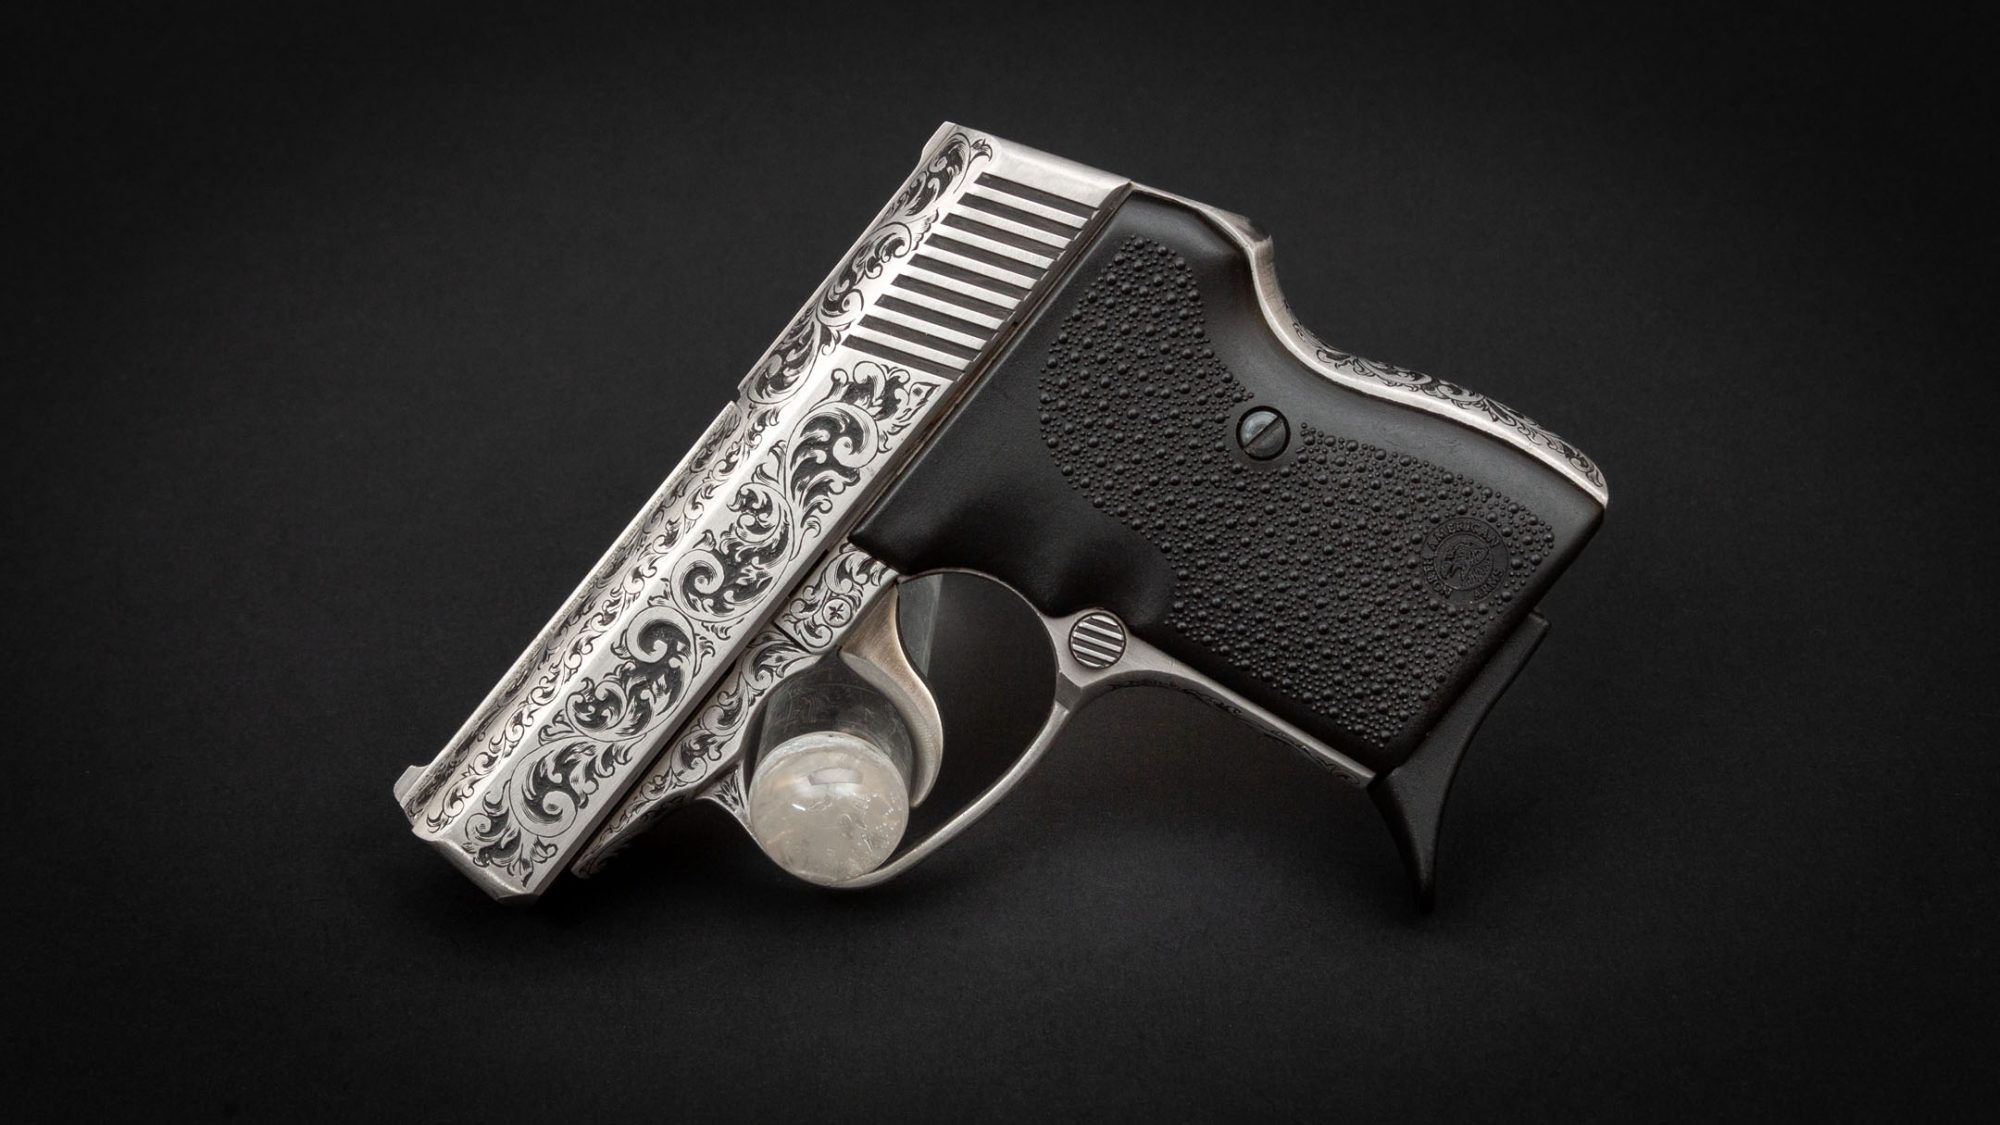 North American Arms Guardian Model in .380 ACP, for sale by Turnbull Restoration Co. of Bloomfield, NY